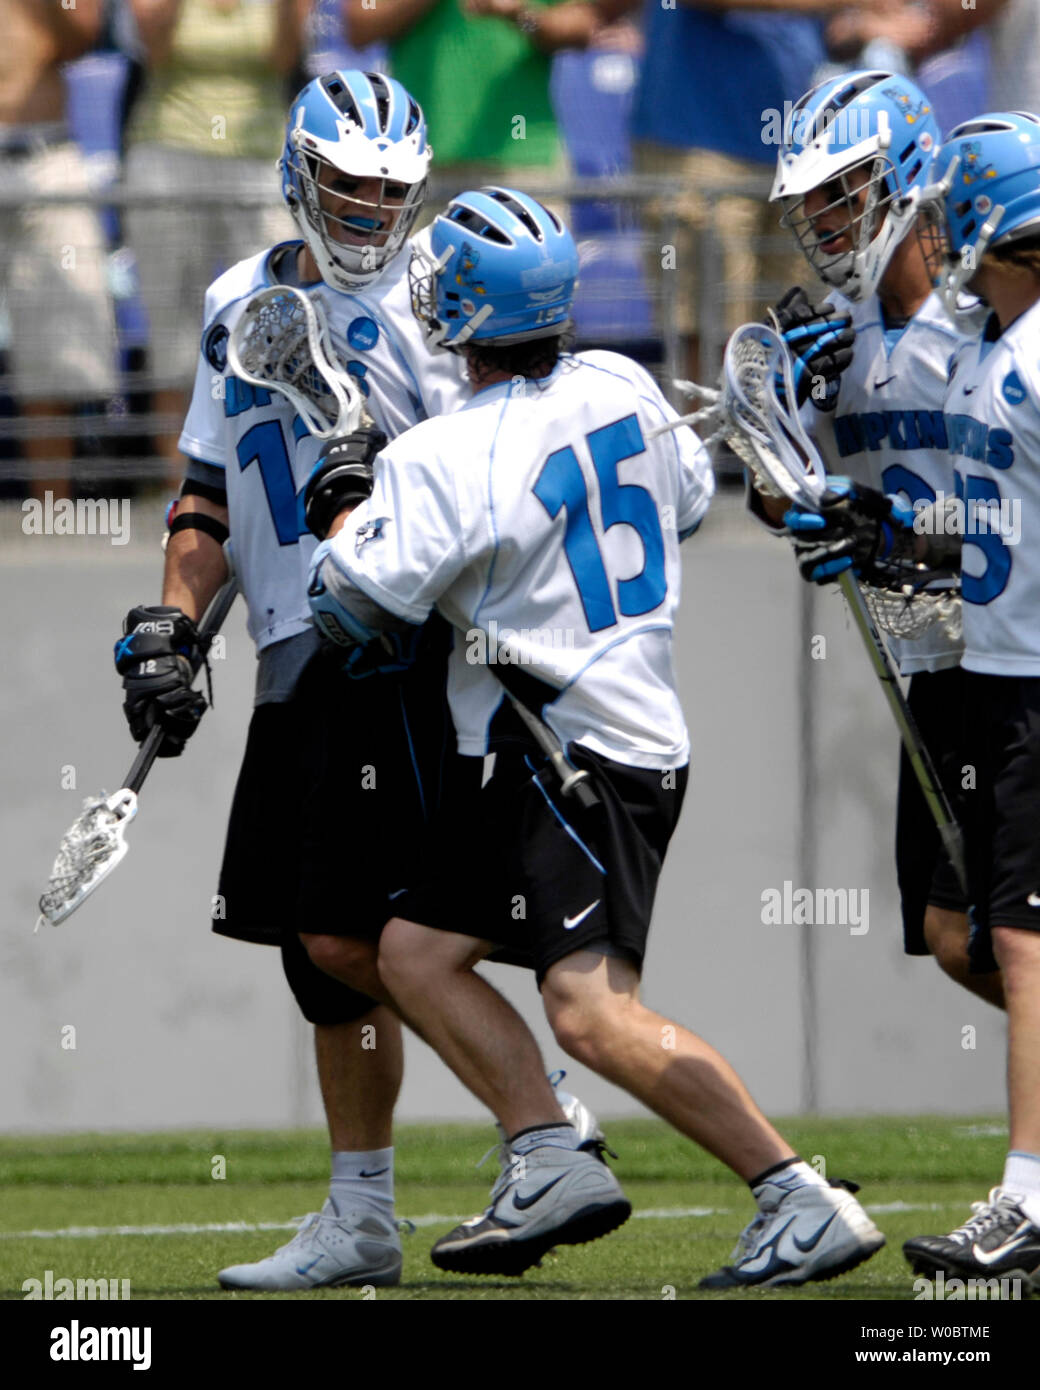 Johns Hopkins University Blue Jays Stephen Peyser (l) is congratulated by Michael Kimmel (15) after scoring a goal in the fourth quarter against the Delaware Blue Hens in the semi-final of the NCAA Division I lacrosse championship at M&T Bank Stadium in Baltimore, Maryland on May 26, 2007.   Johns Hopkins defeated Delaware 8-3 to move to the lacrosse championship.   (UPI Photo/ Mark Goldman) Stock Photo